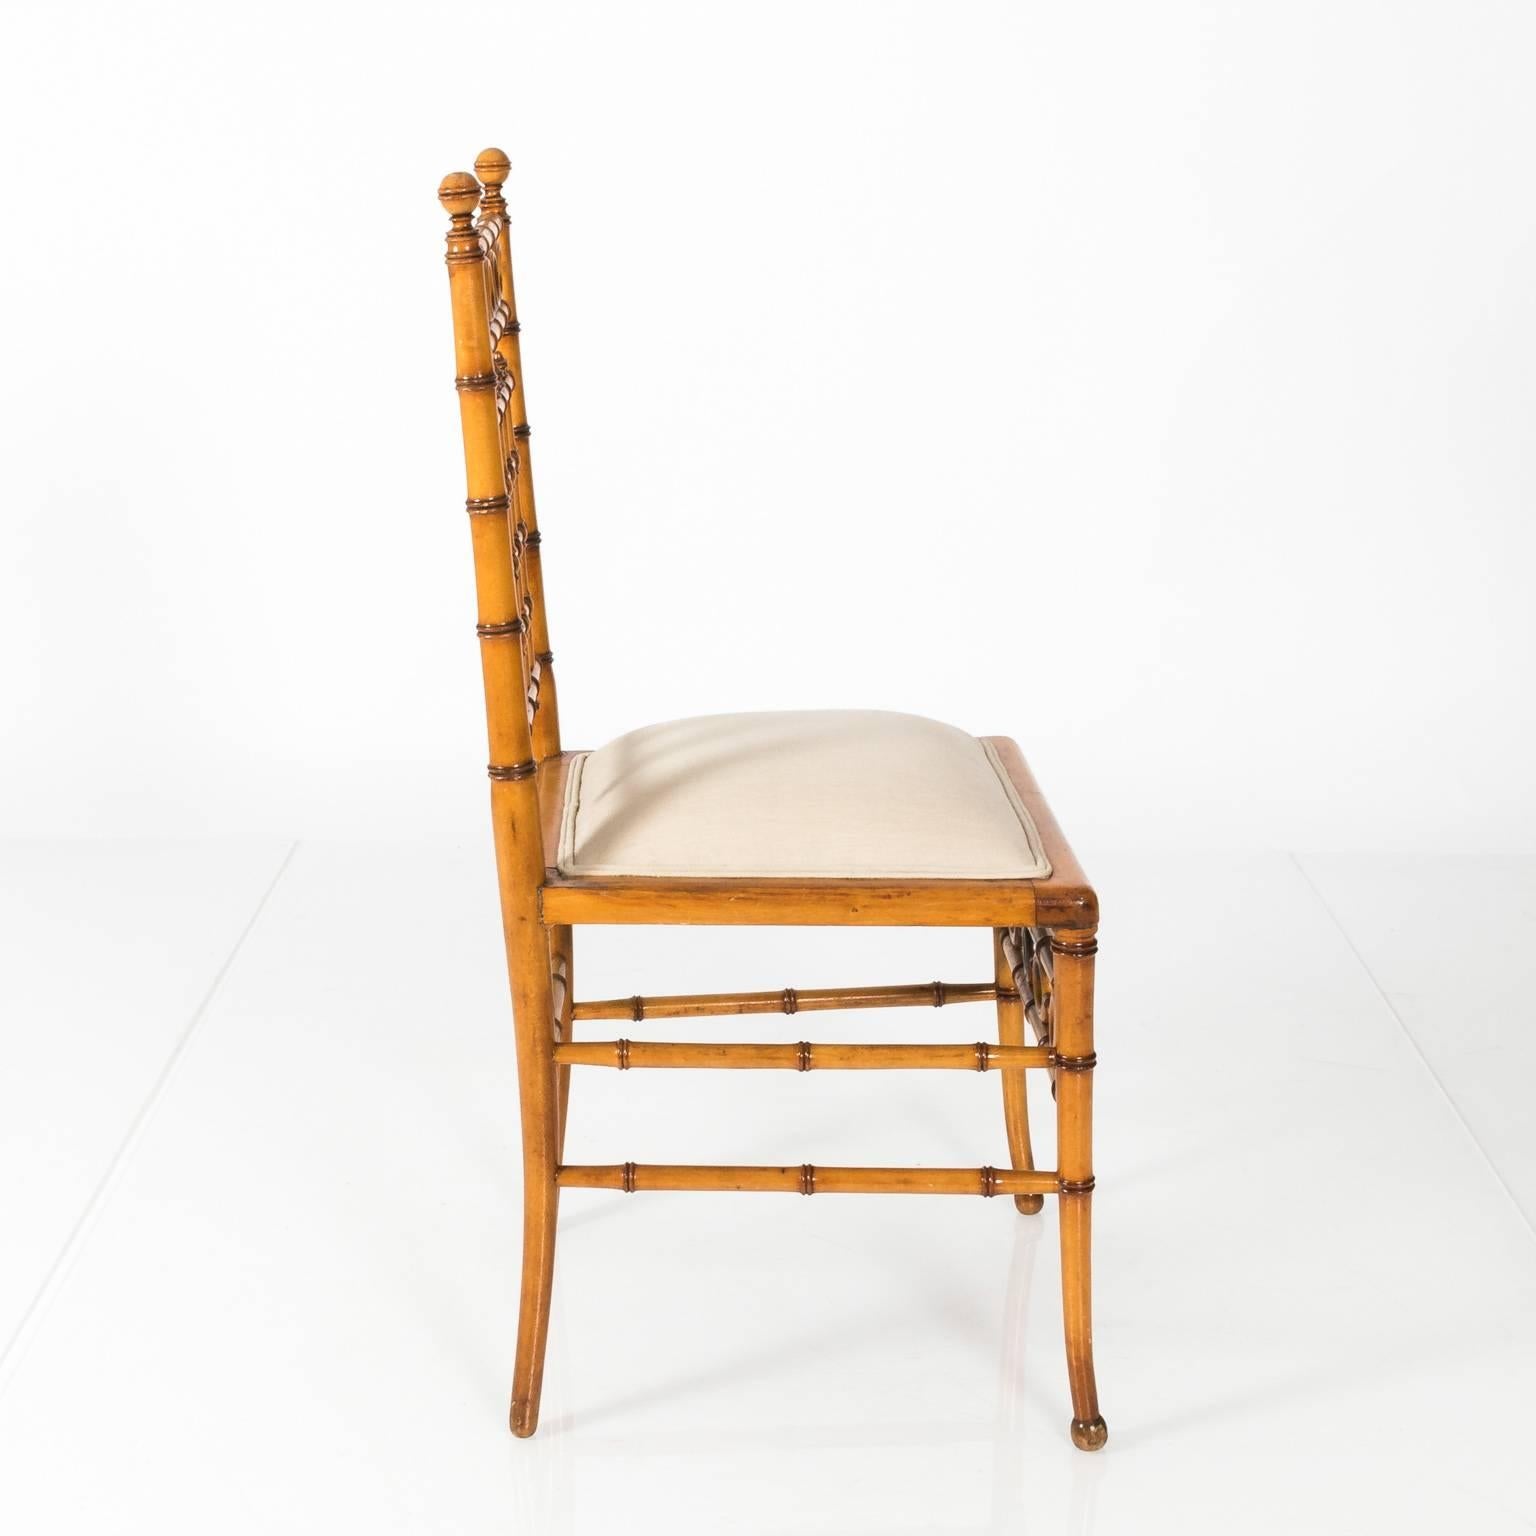 19th Century Faux Bamboo Chair by Horner, circa 1880